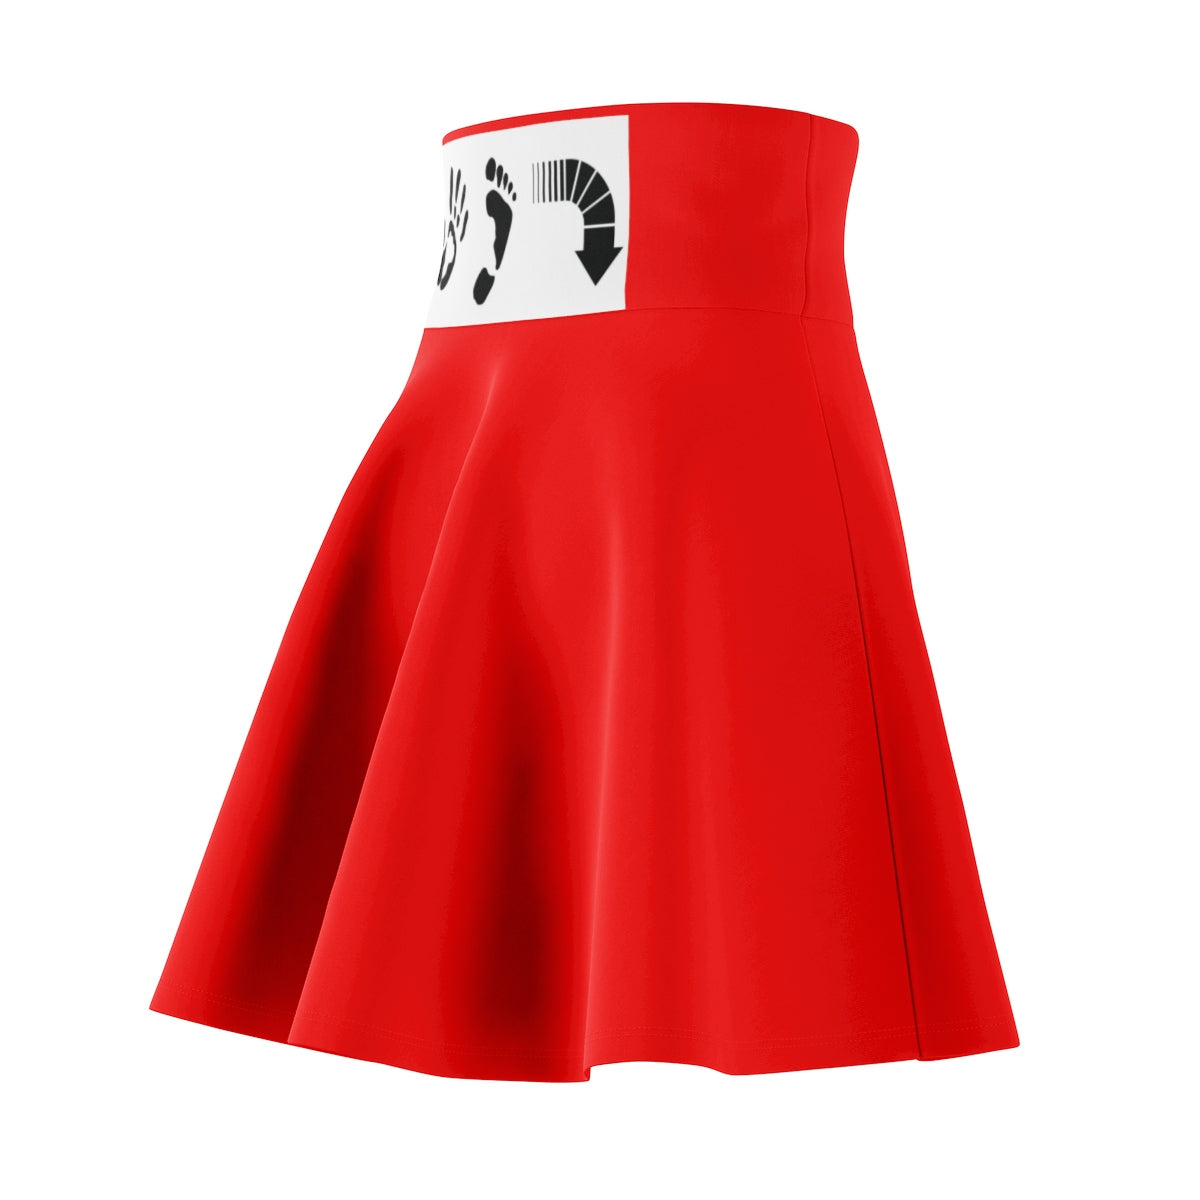 Five Toes Down Red Women's Skater Skirt